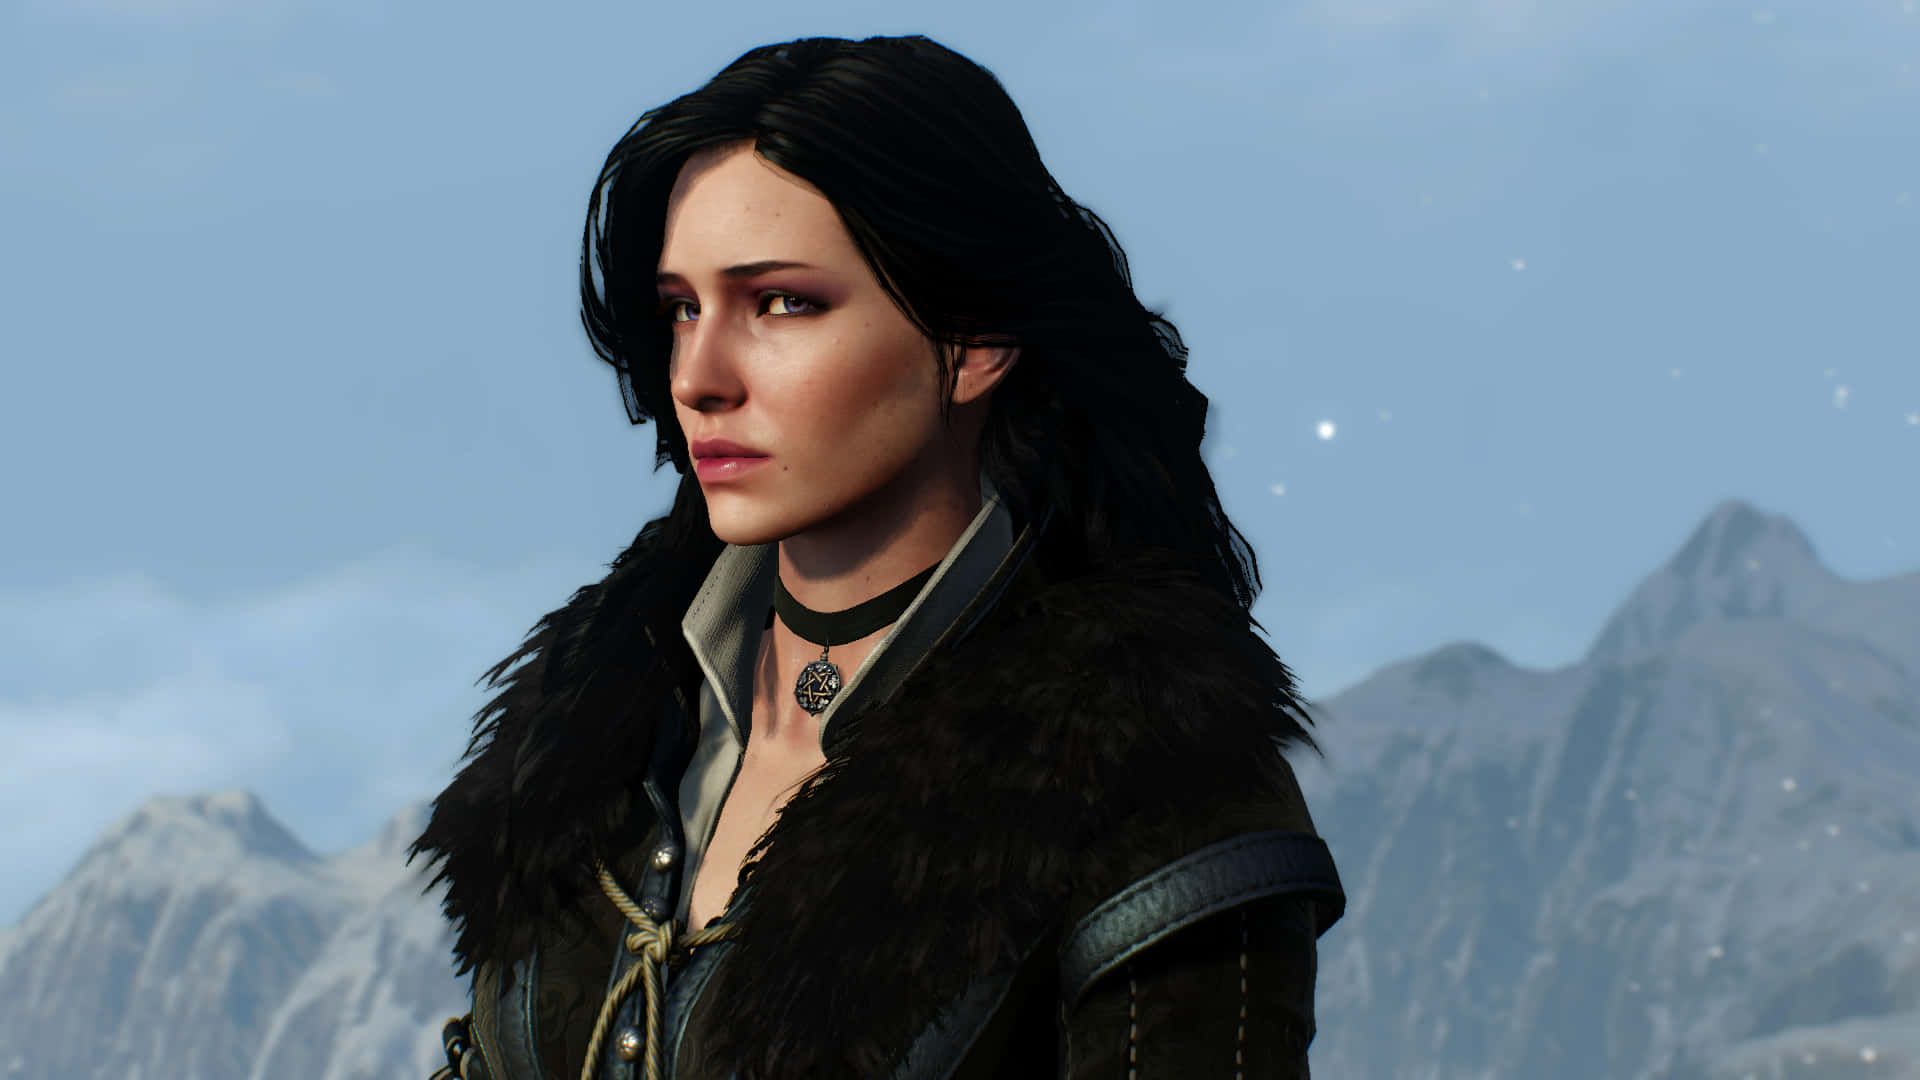 Sorceress Yennefer From The Witcher Series Wallpaper